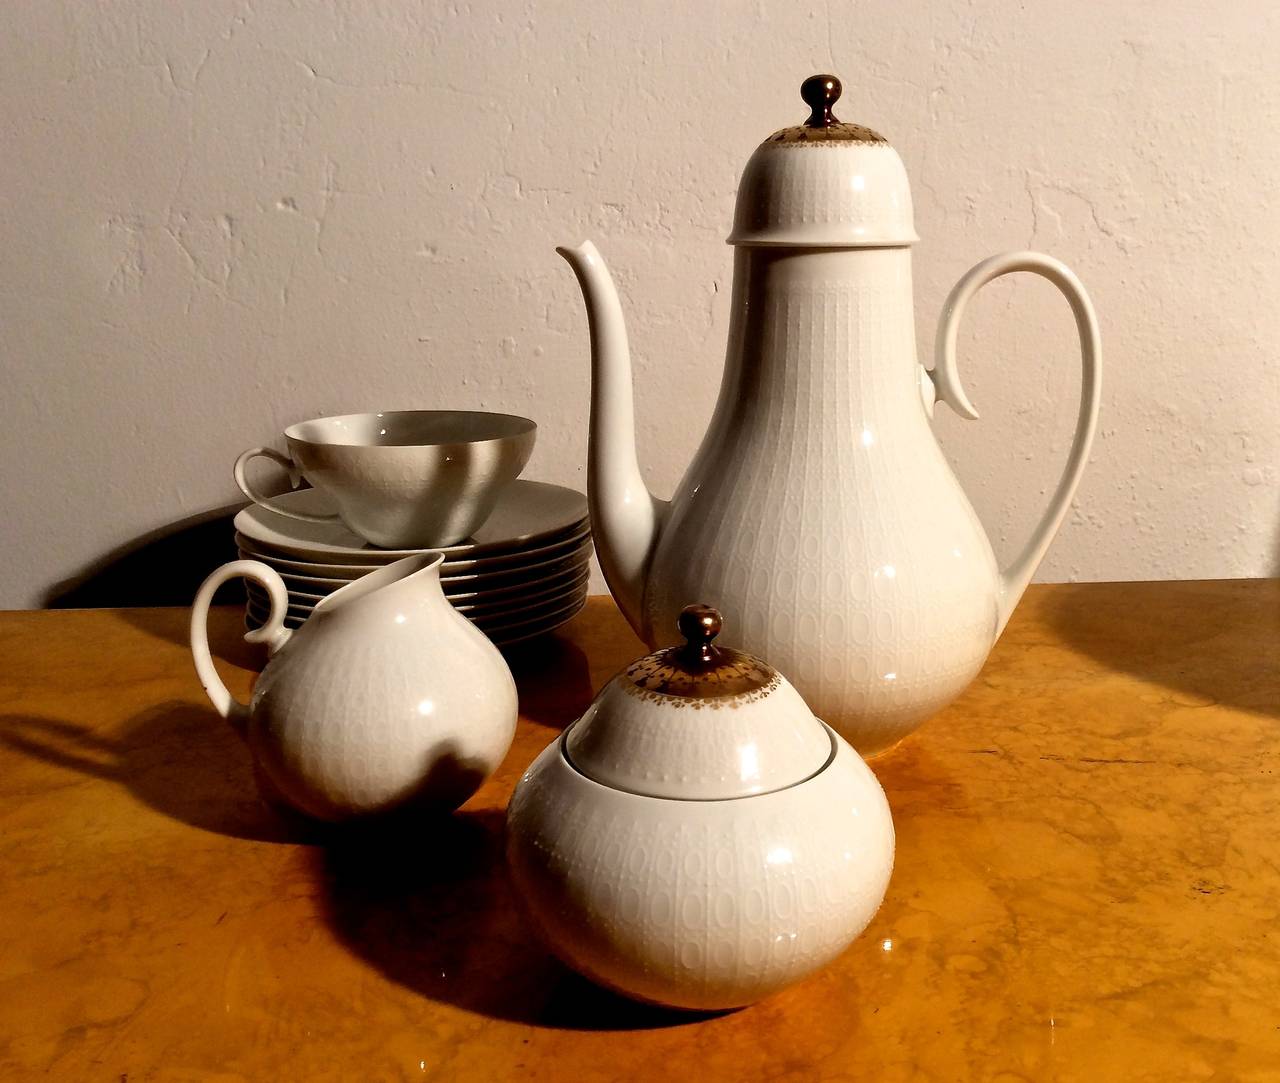 Porcelain coffee and dessert service for four in the Romanze pattern designed by Bjorn Wiinblad in 1959 and made by Rosenthal for their Studio-Linie in Germany. Set consists of coffee pot; creamer; sugar bowl; four cups and saucers; four small